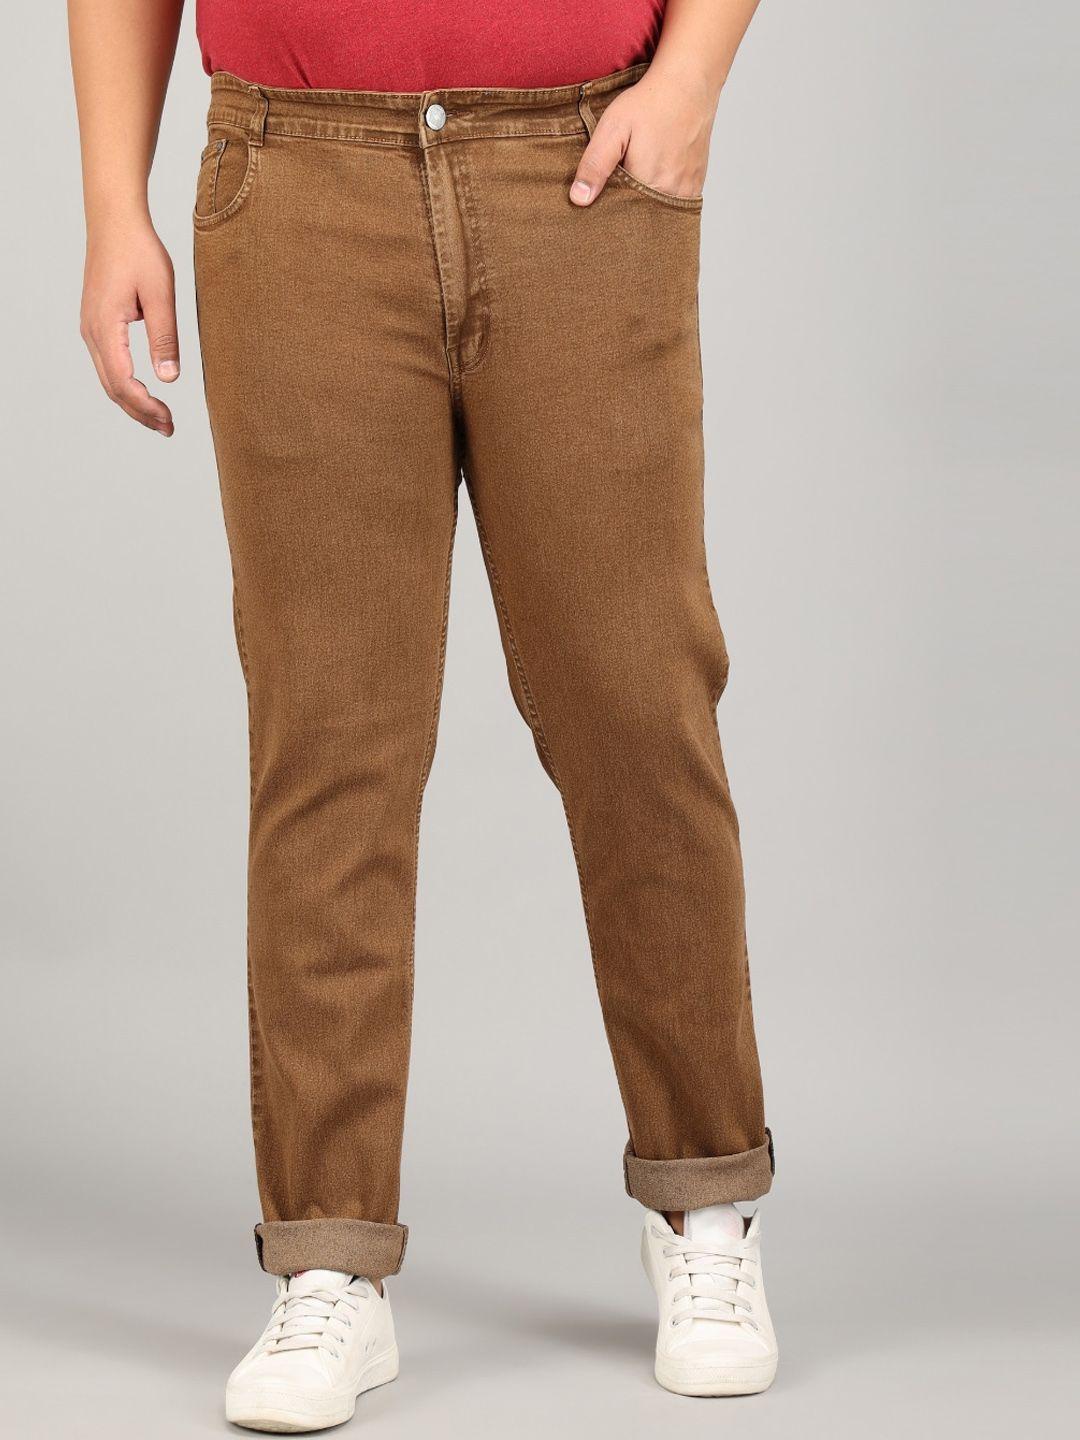 studio nexx men brown relaxed fit stretchable jeans